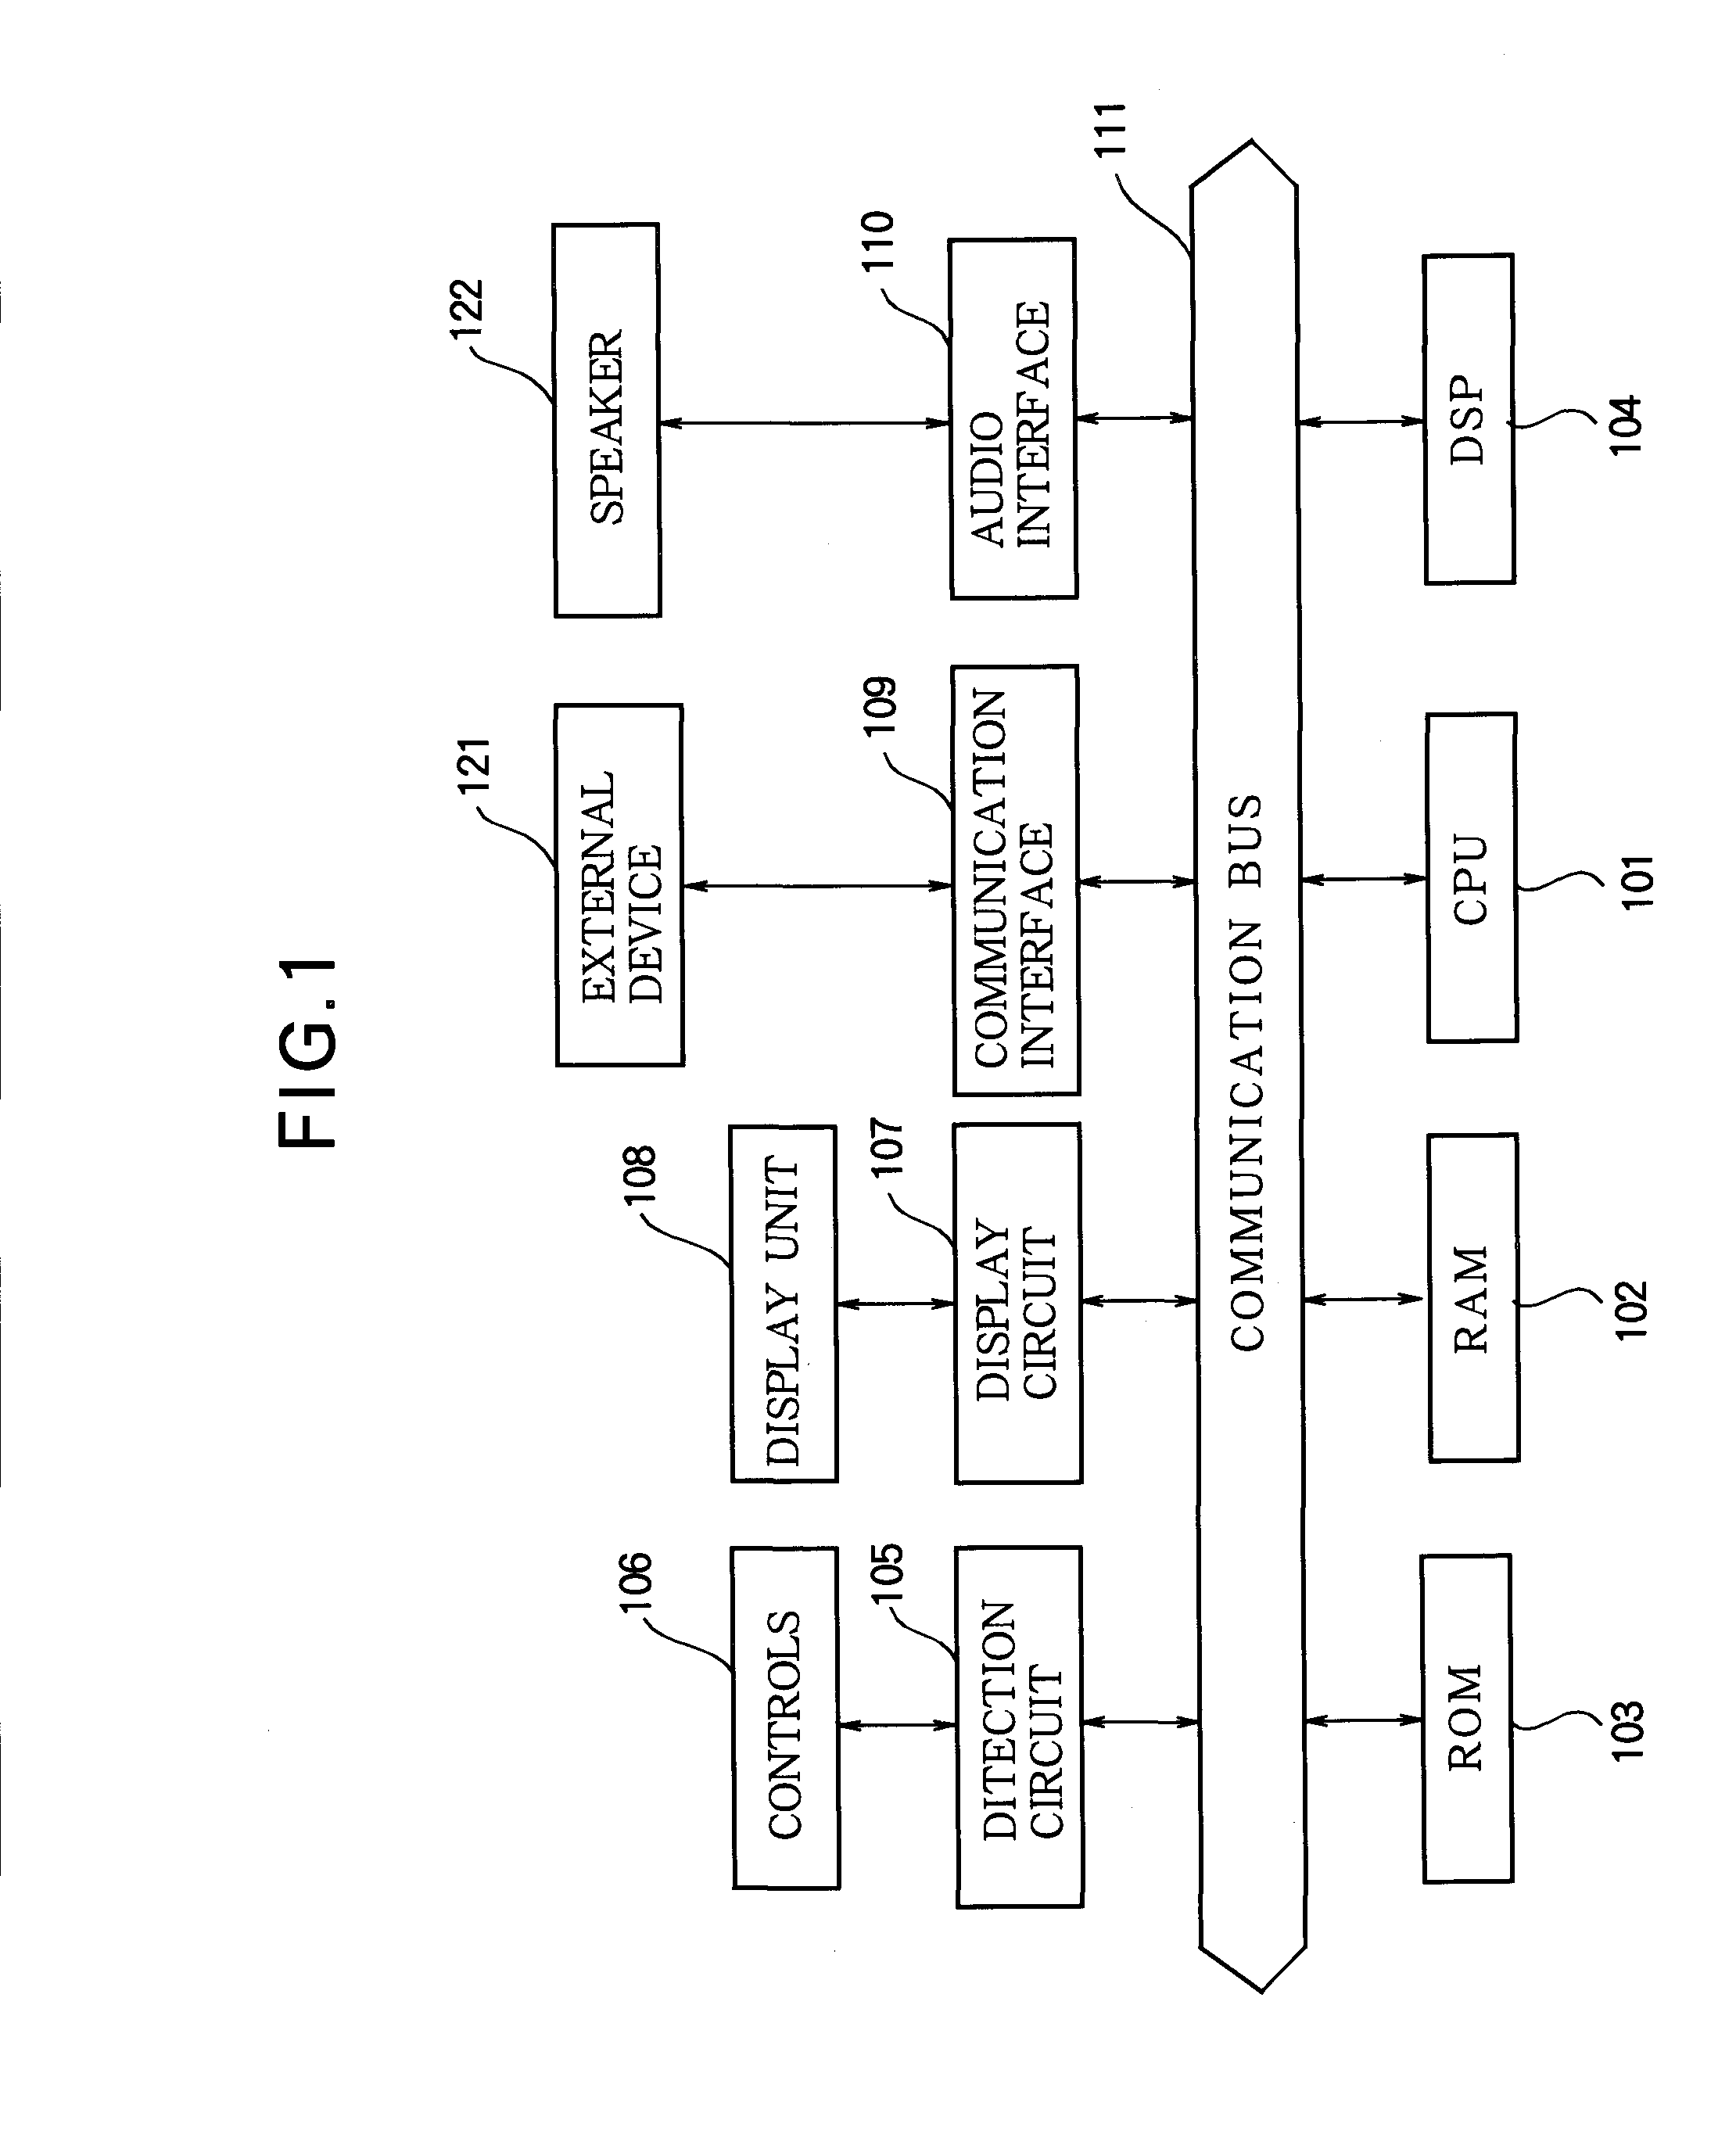 Mixer device, method for controlling windows of mixer device, and program for controlling windows of mixer device